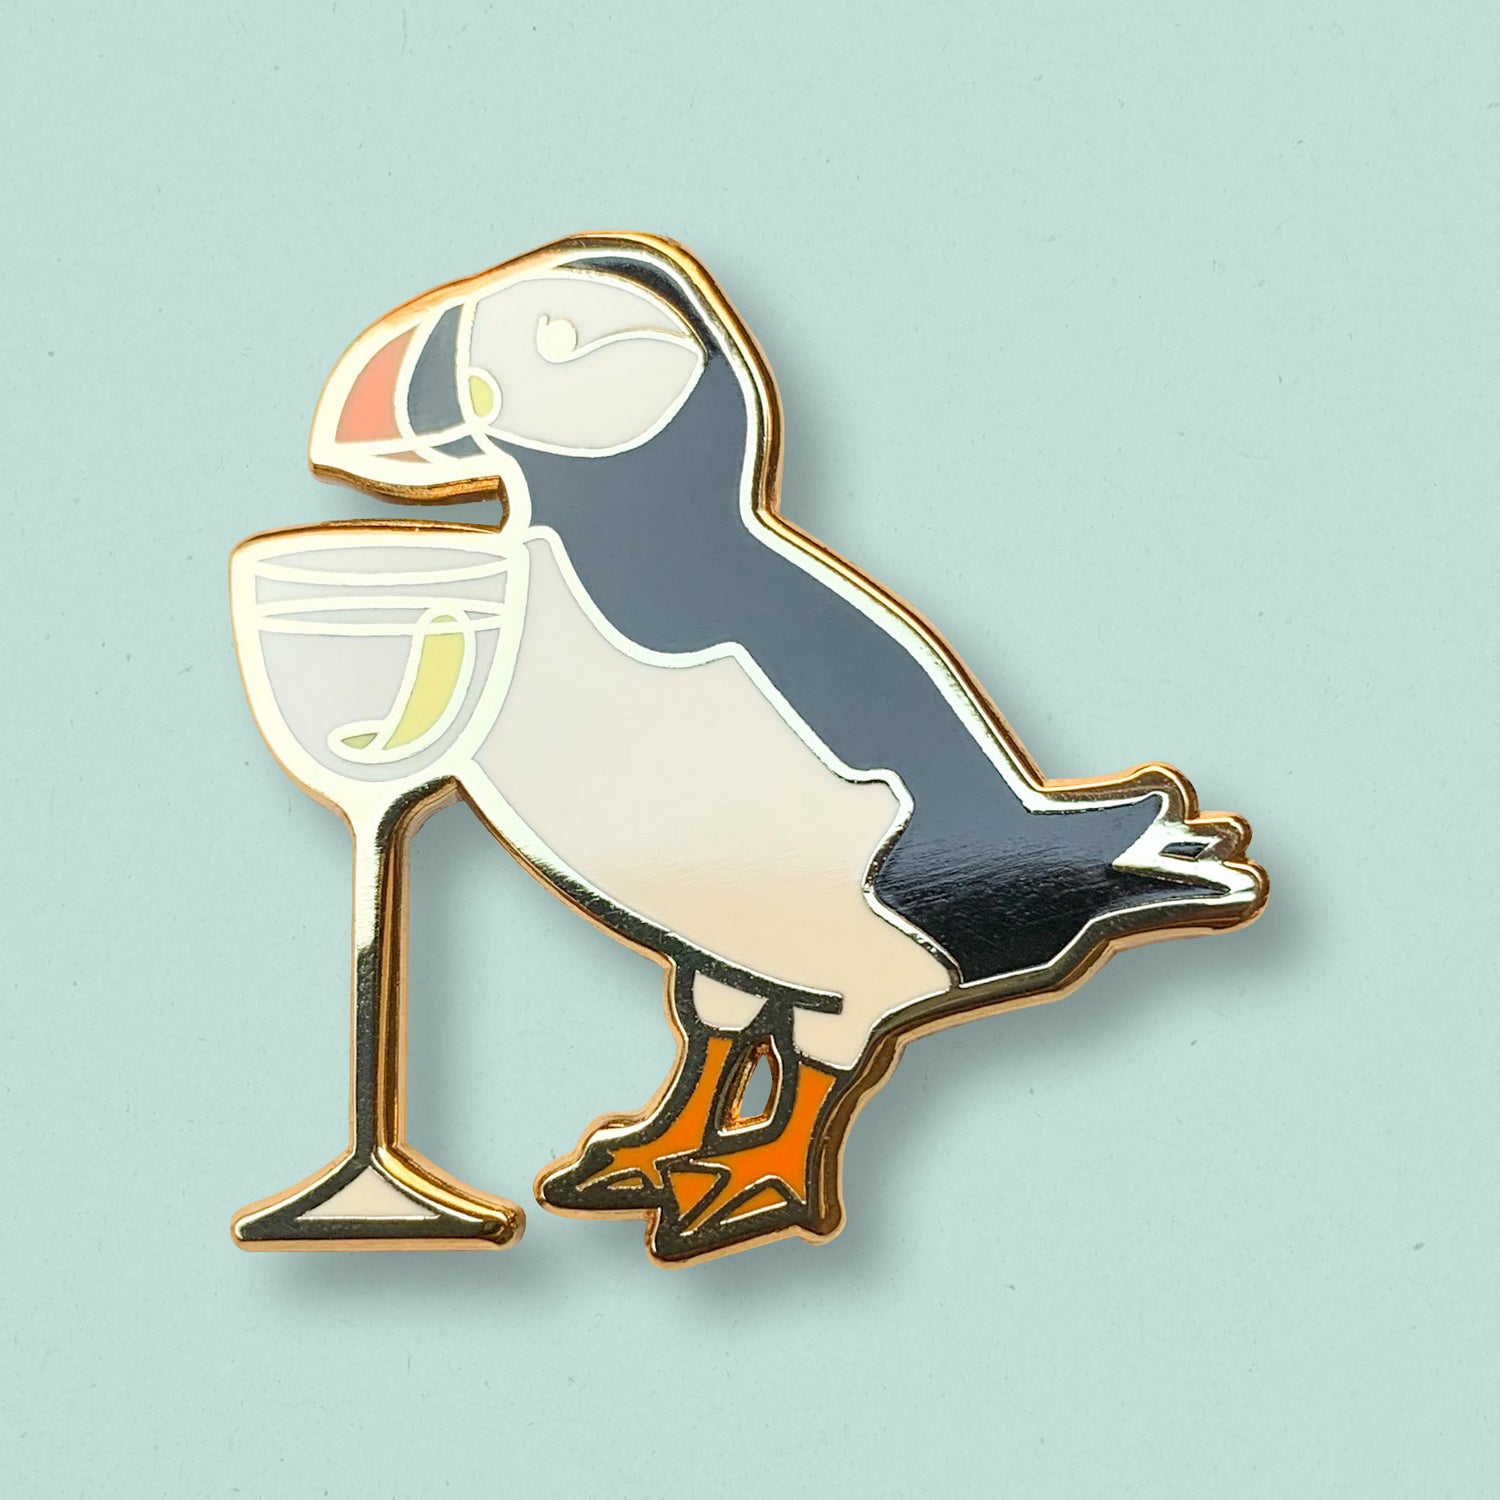 Puffin & Vodka Martini Cocktail Hard Enamel Pin by Cocktail Critters